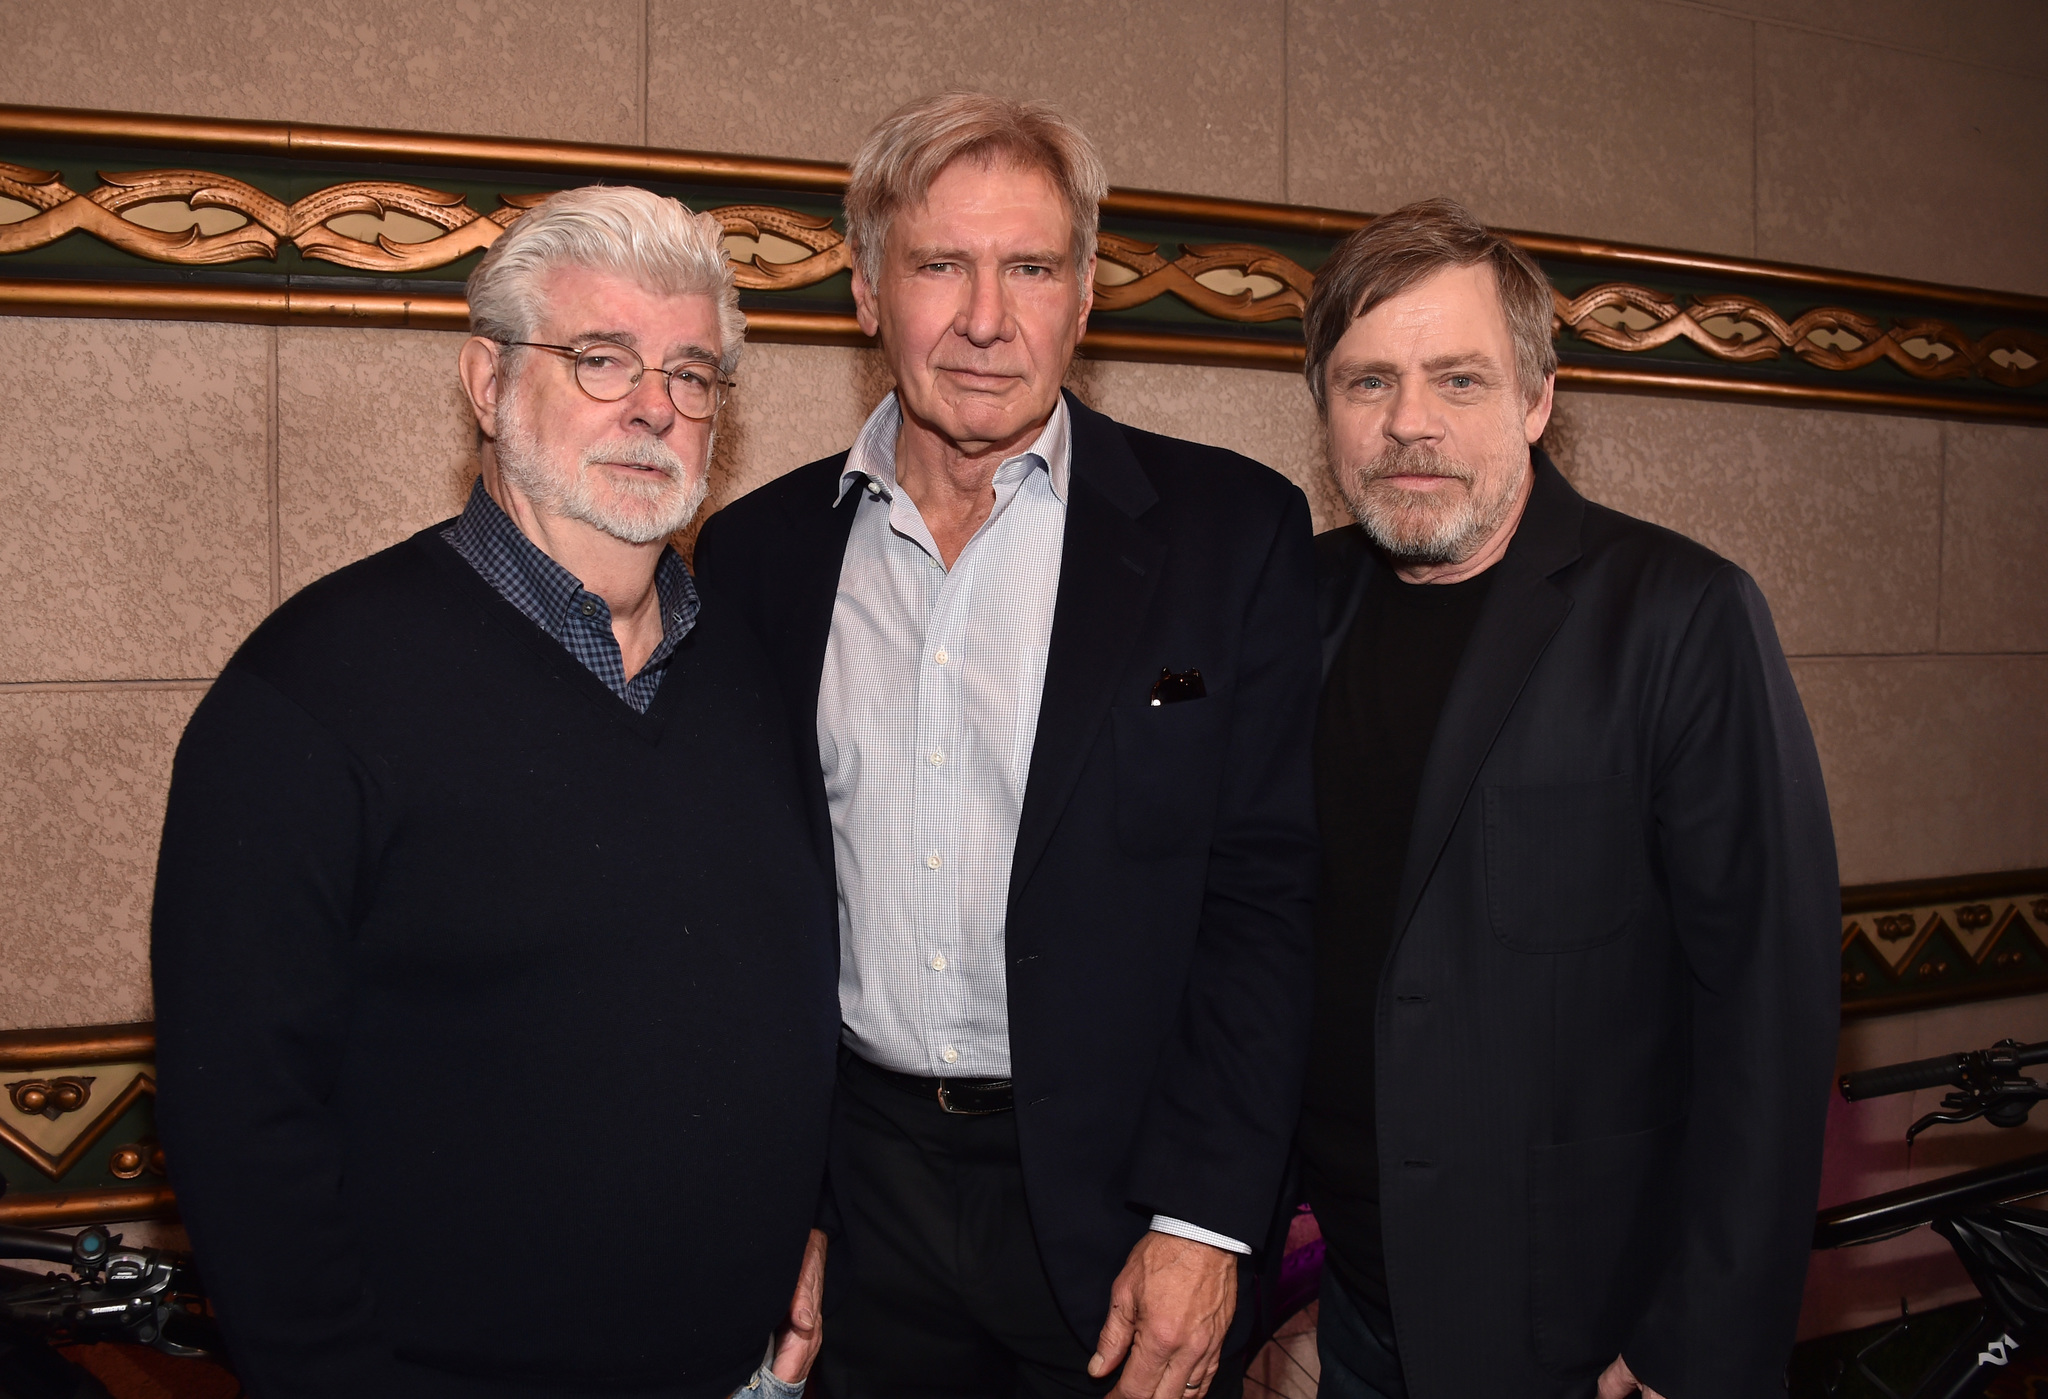 Harrison Ford with George Lucas, and Mark Hamill